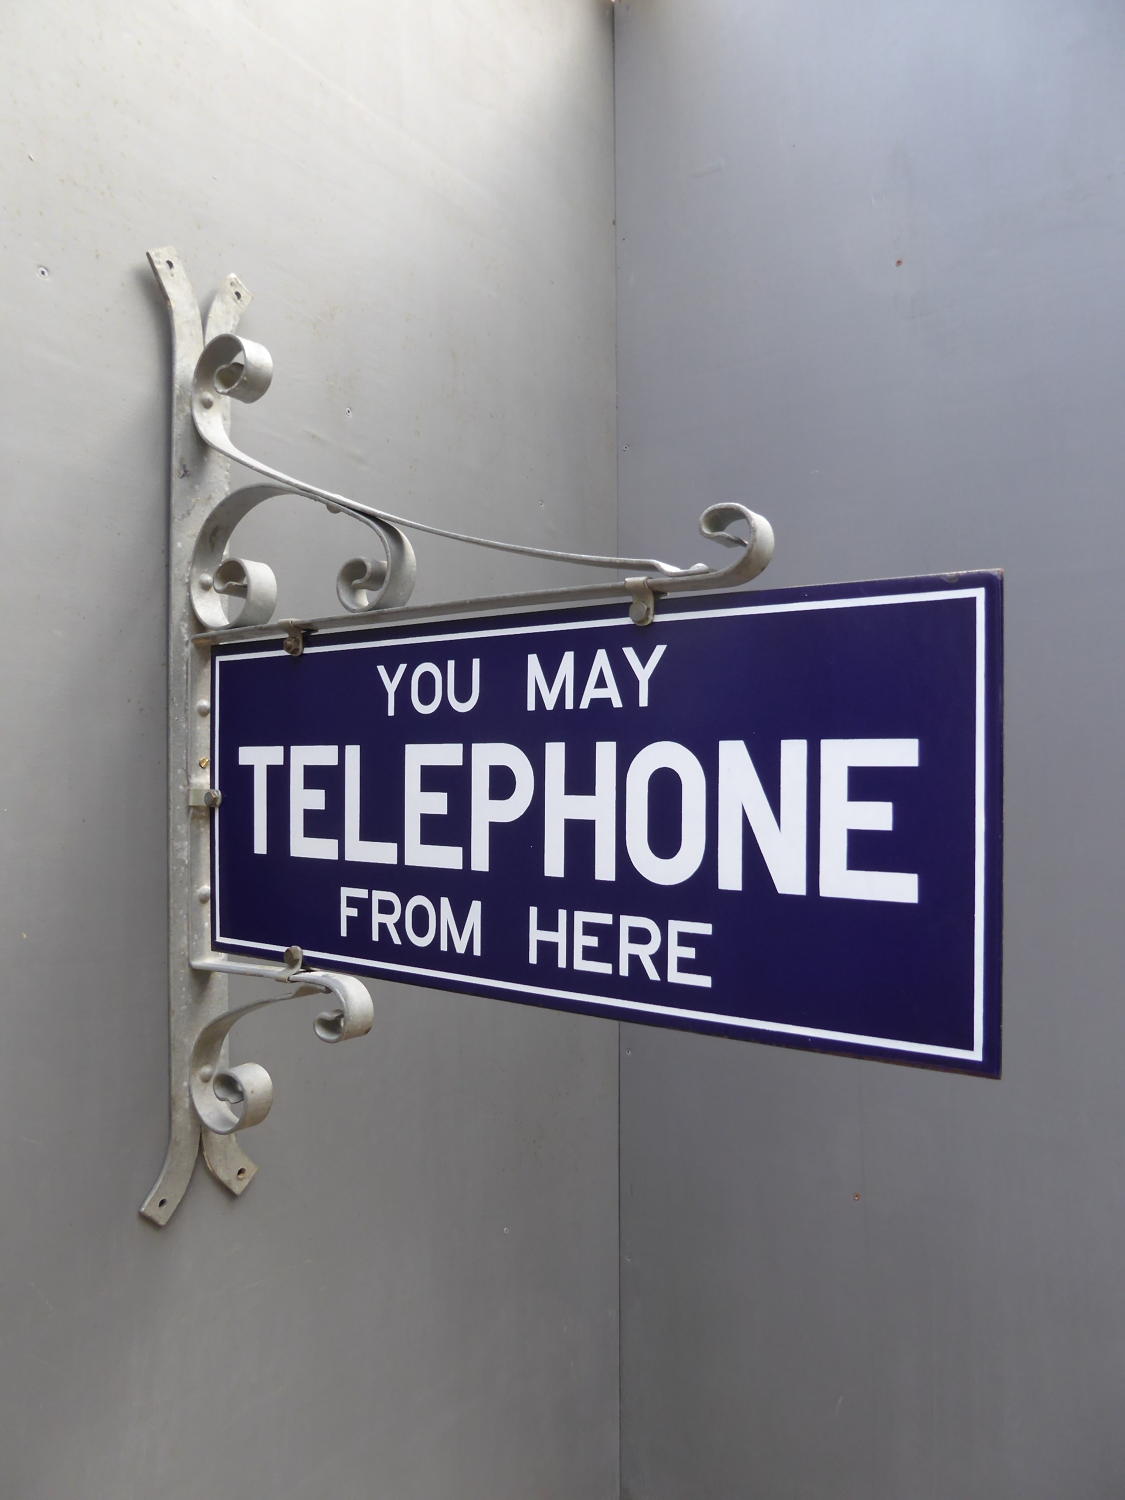 'You May Telephone From Here'